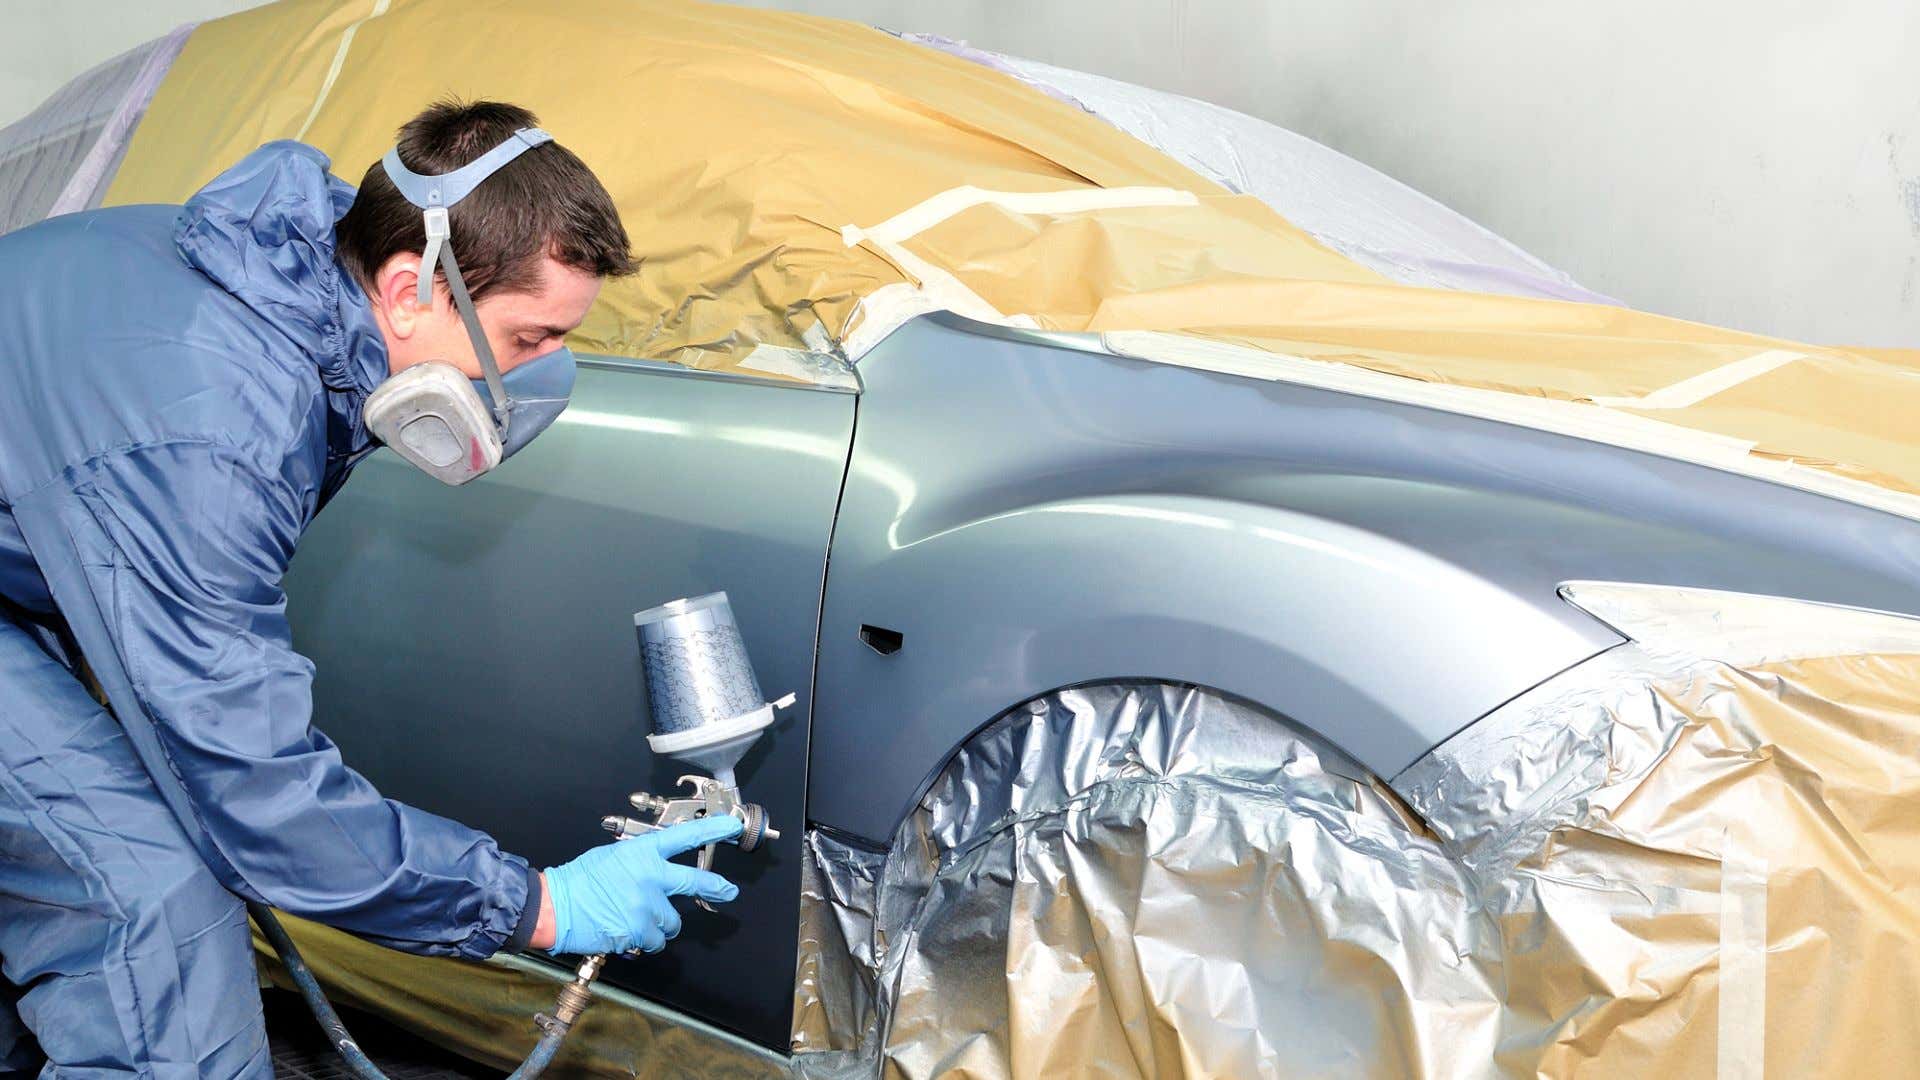 How Much Does It Cost To Paint A Car?